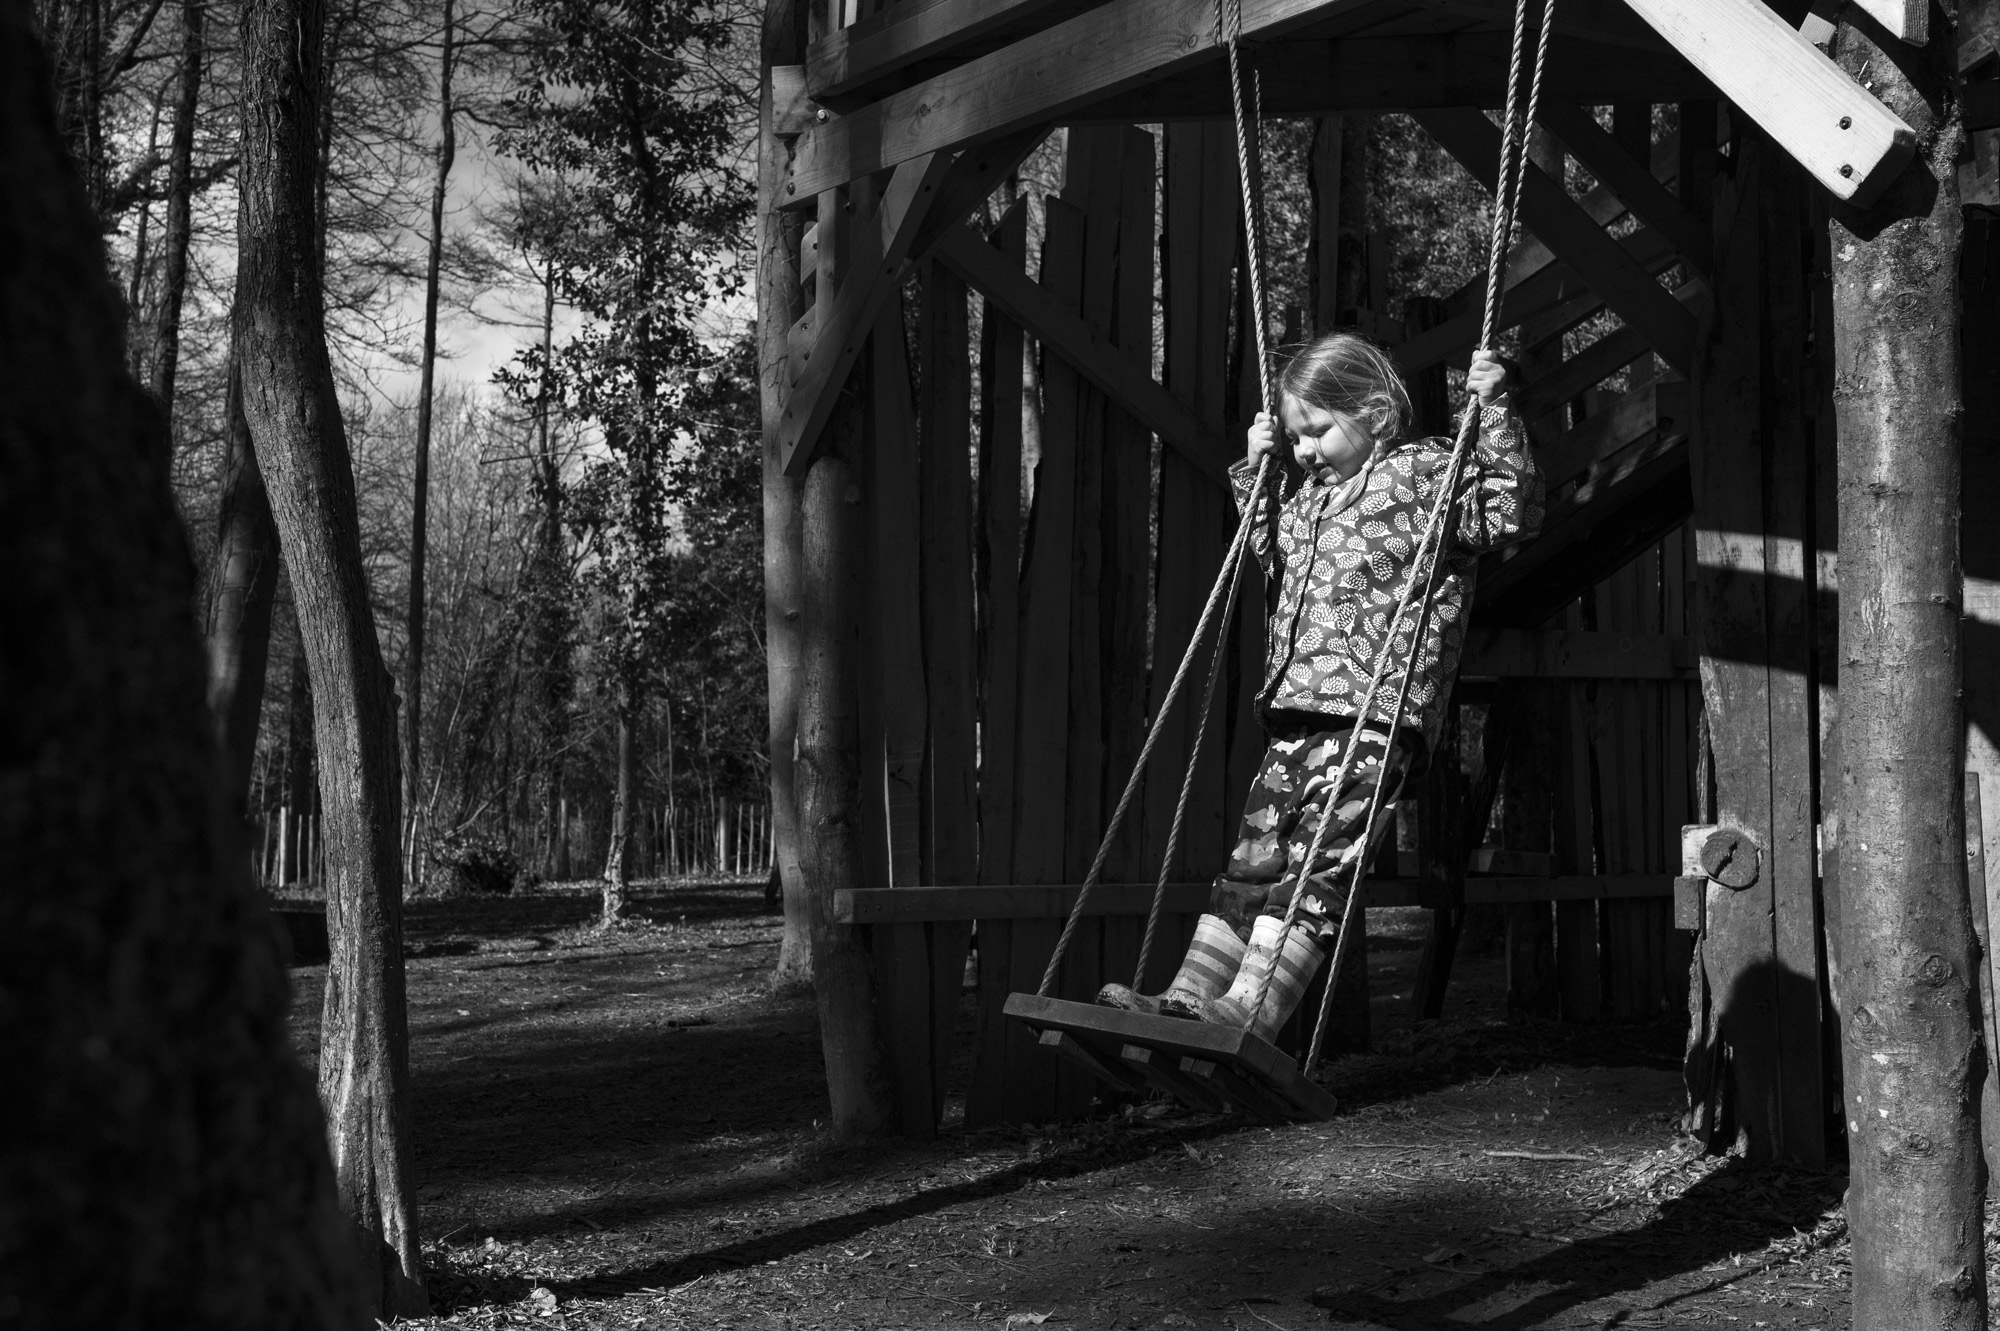 Capturing action by freezing motion - girl on swing